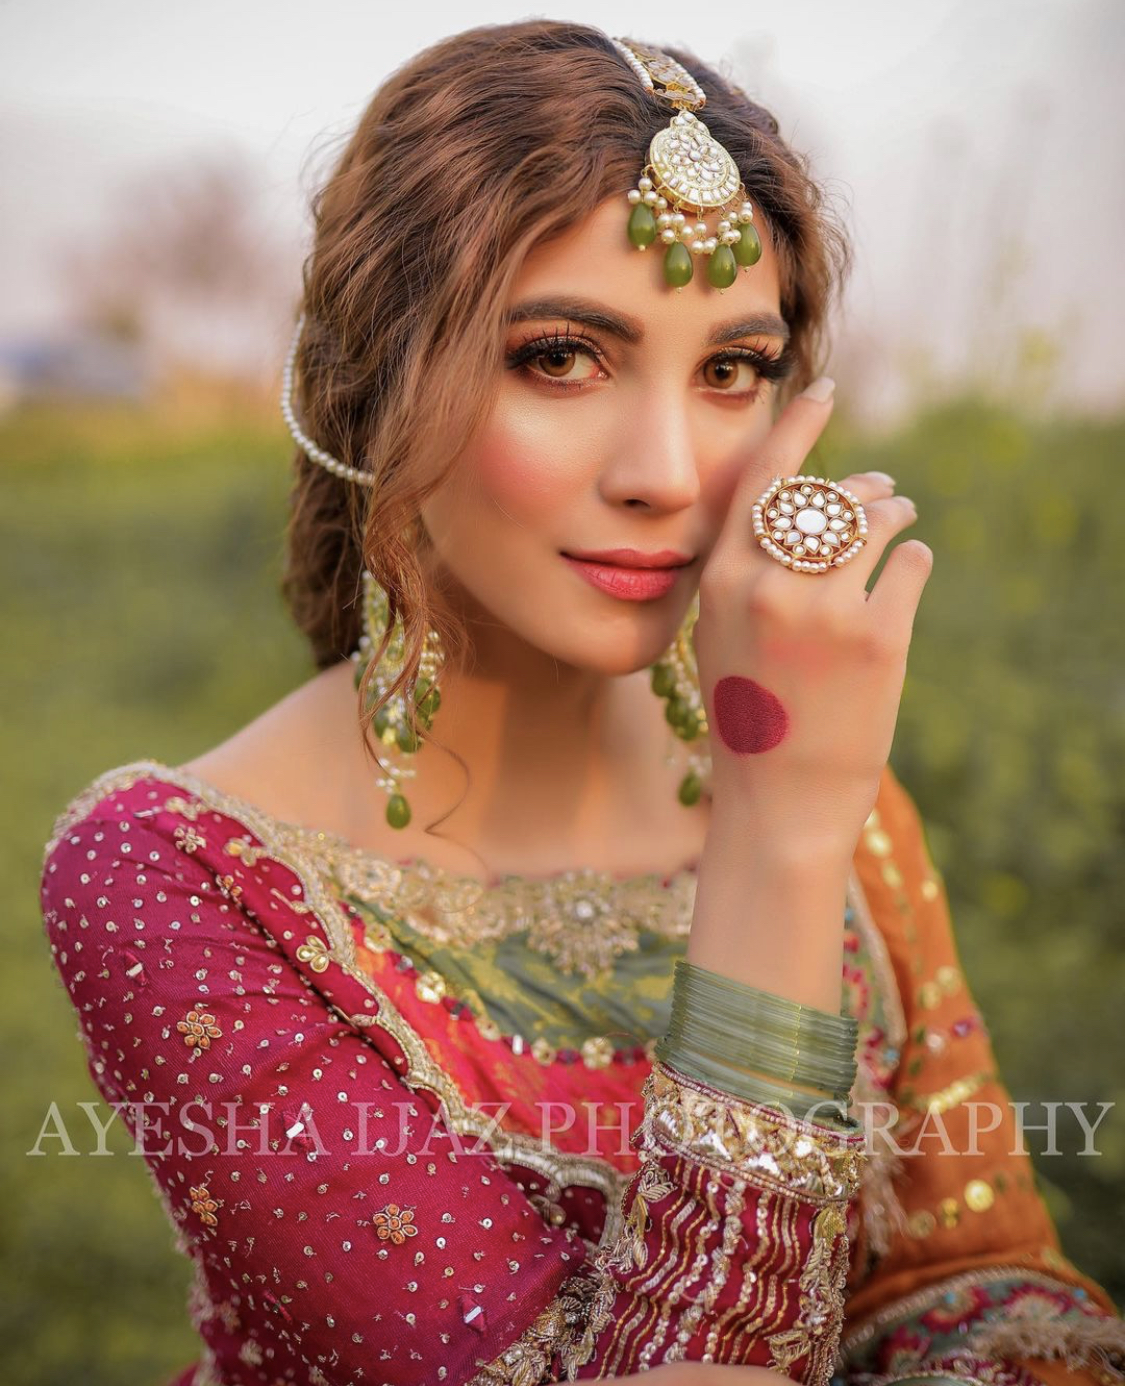 Nazish Jahangir Looks Gorgeous In Her Latest Photoshoot | Reviewit.pk